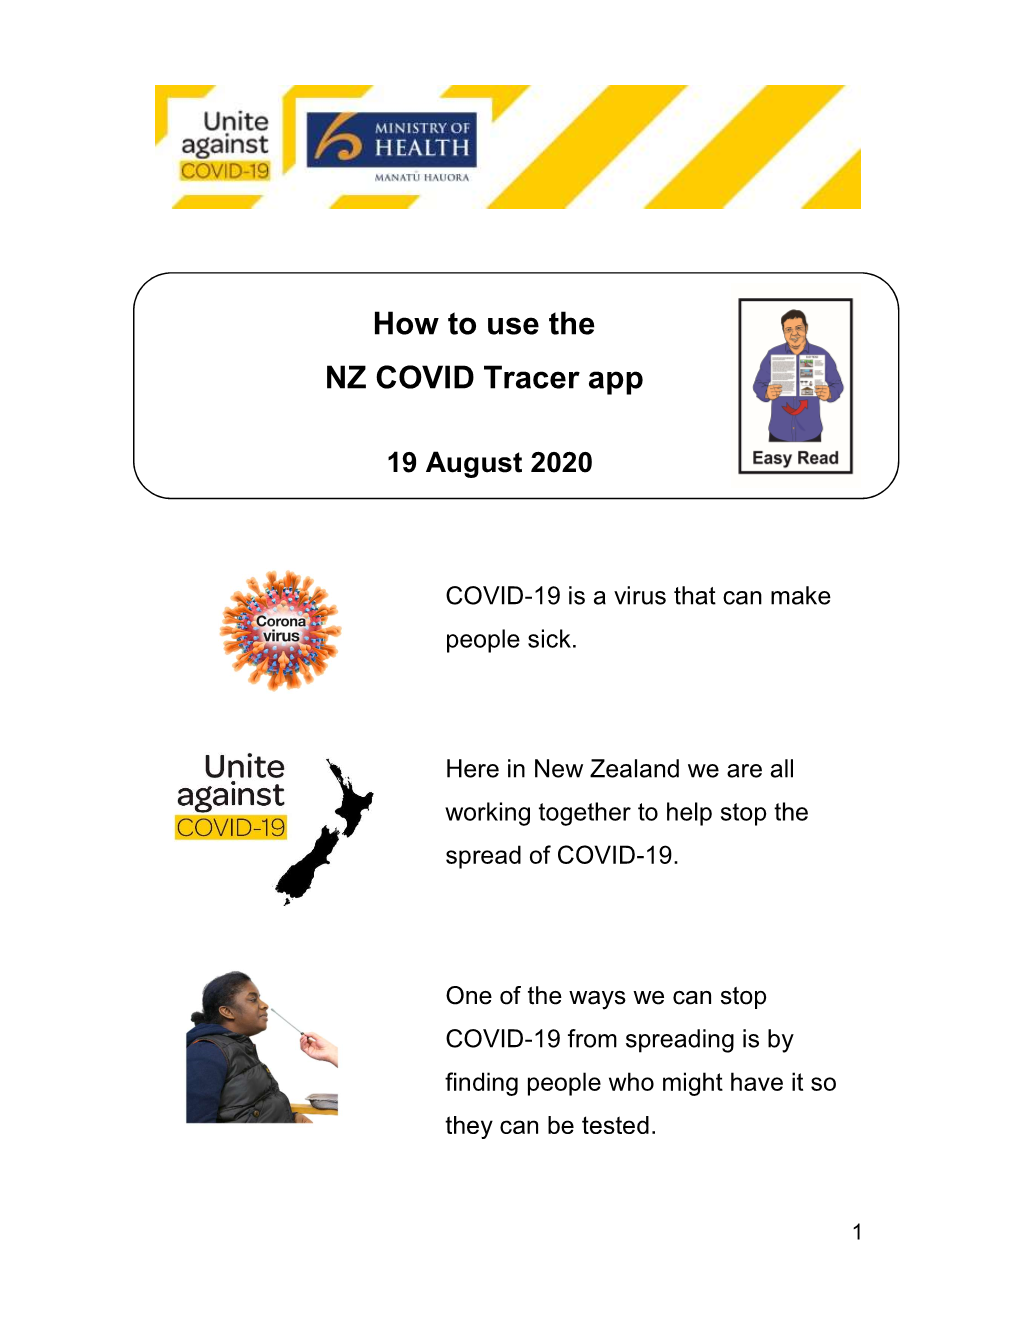 How to Use the NZ COVID Tracer App